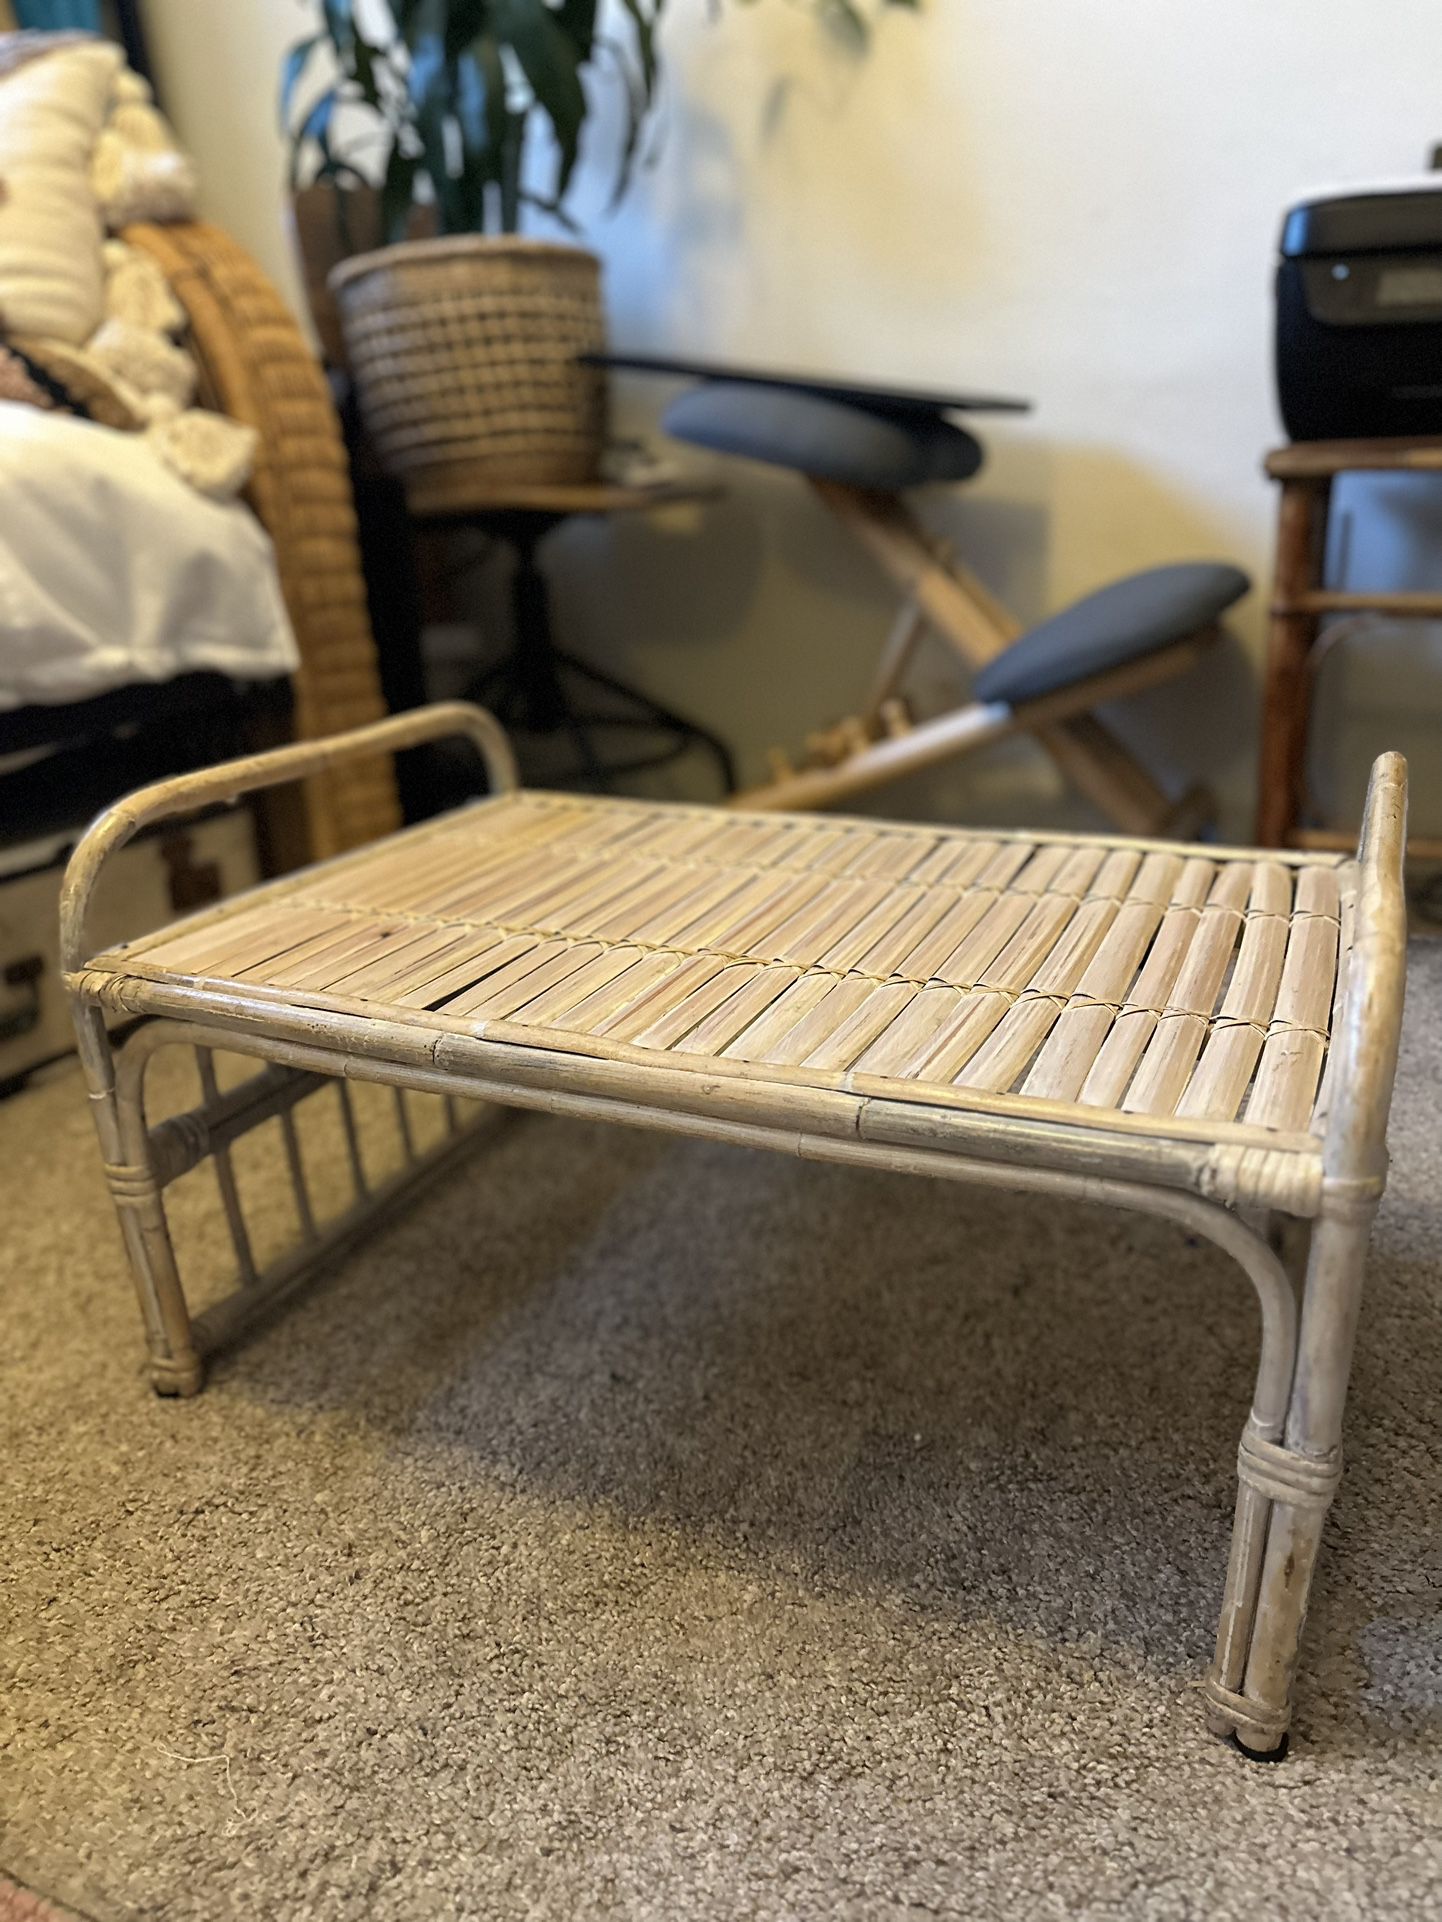 Bamboo Rattan Tweed Shoe Rack or Bed Table/tray 